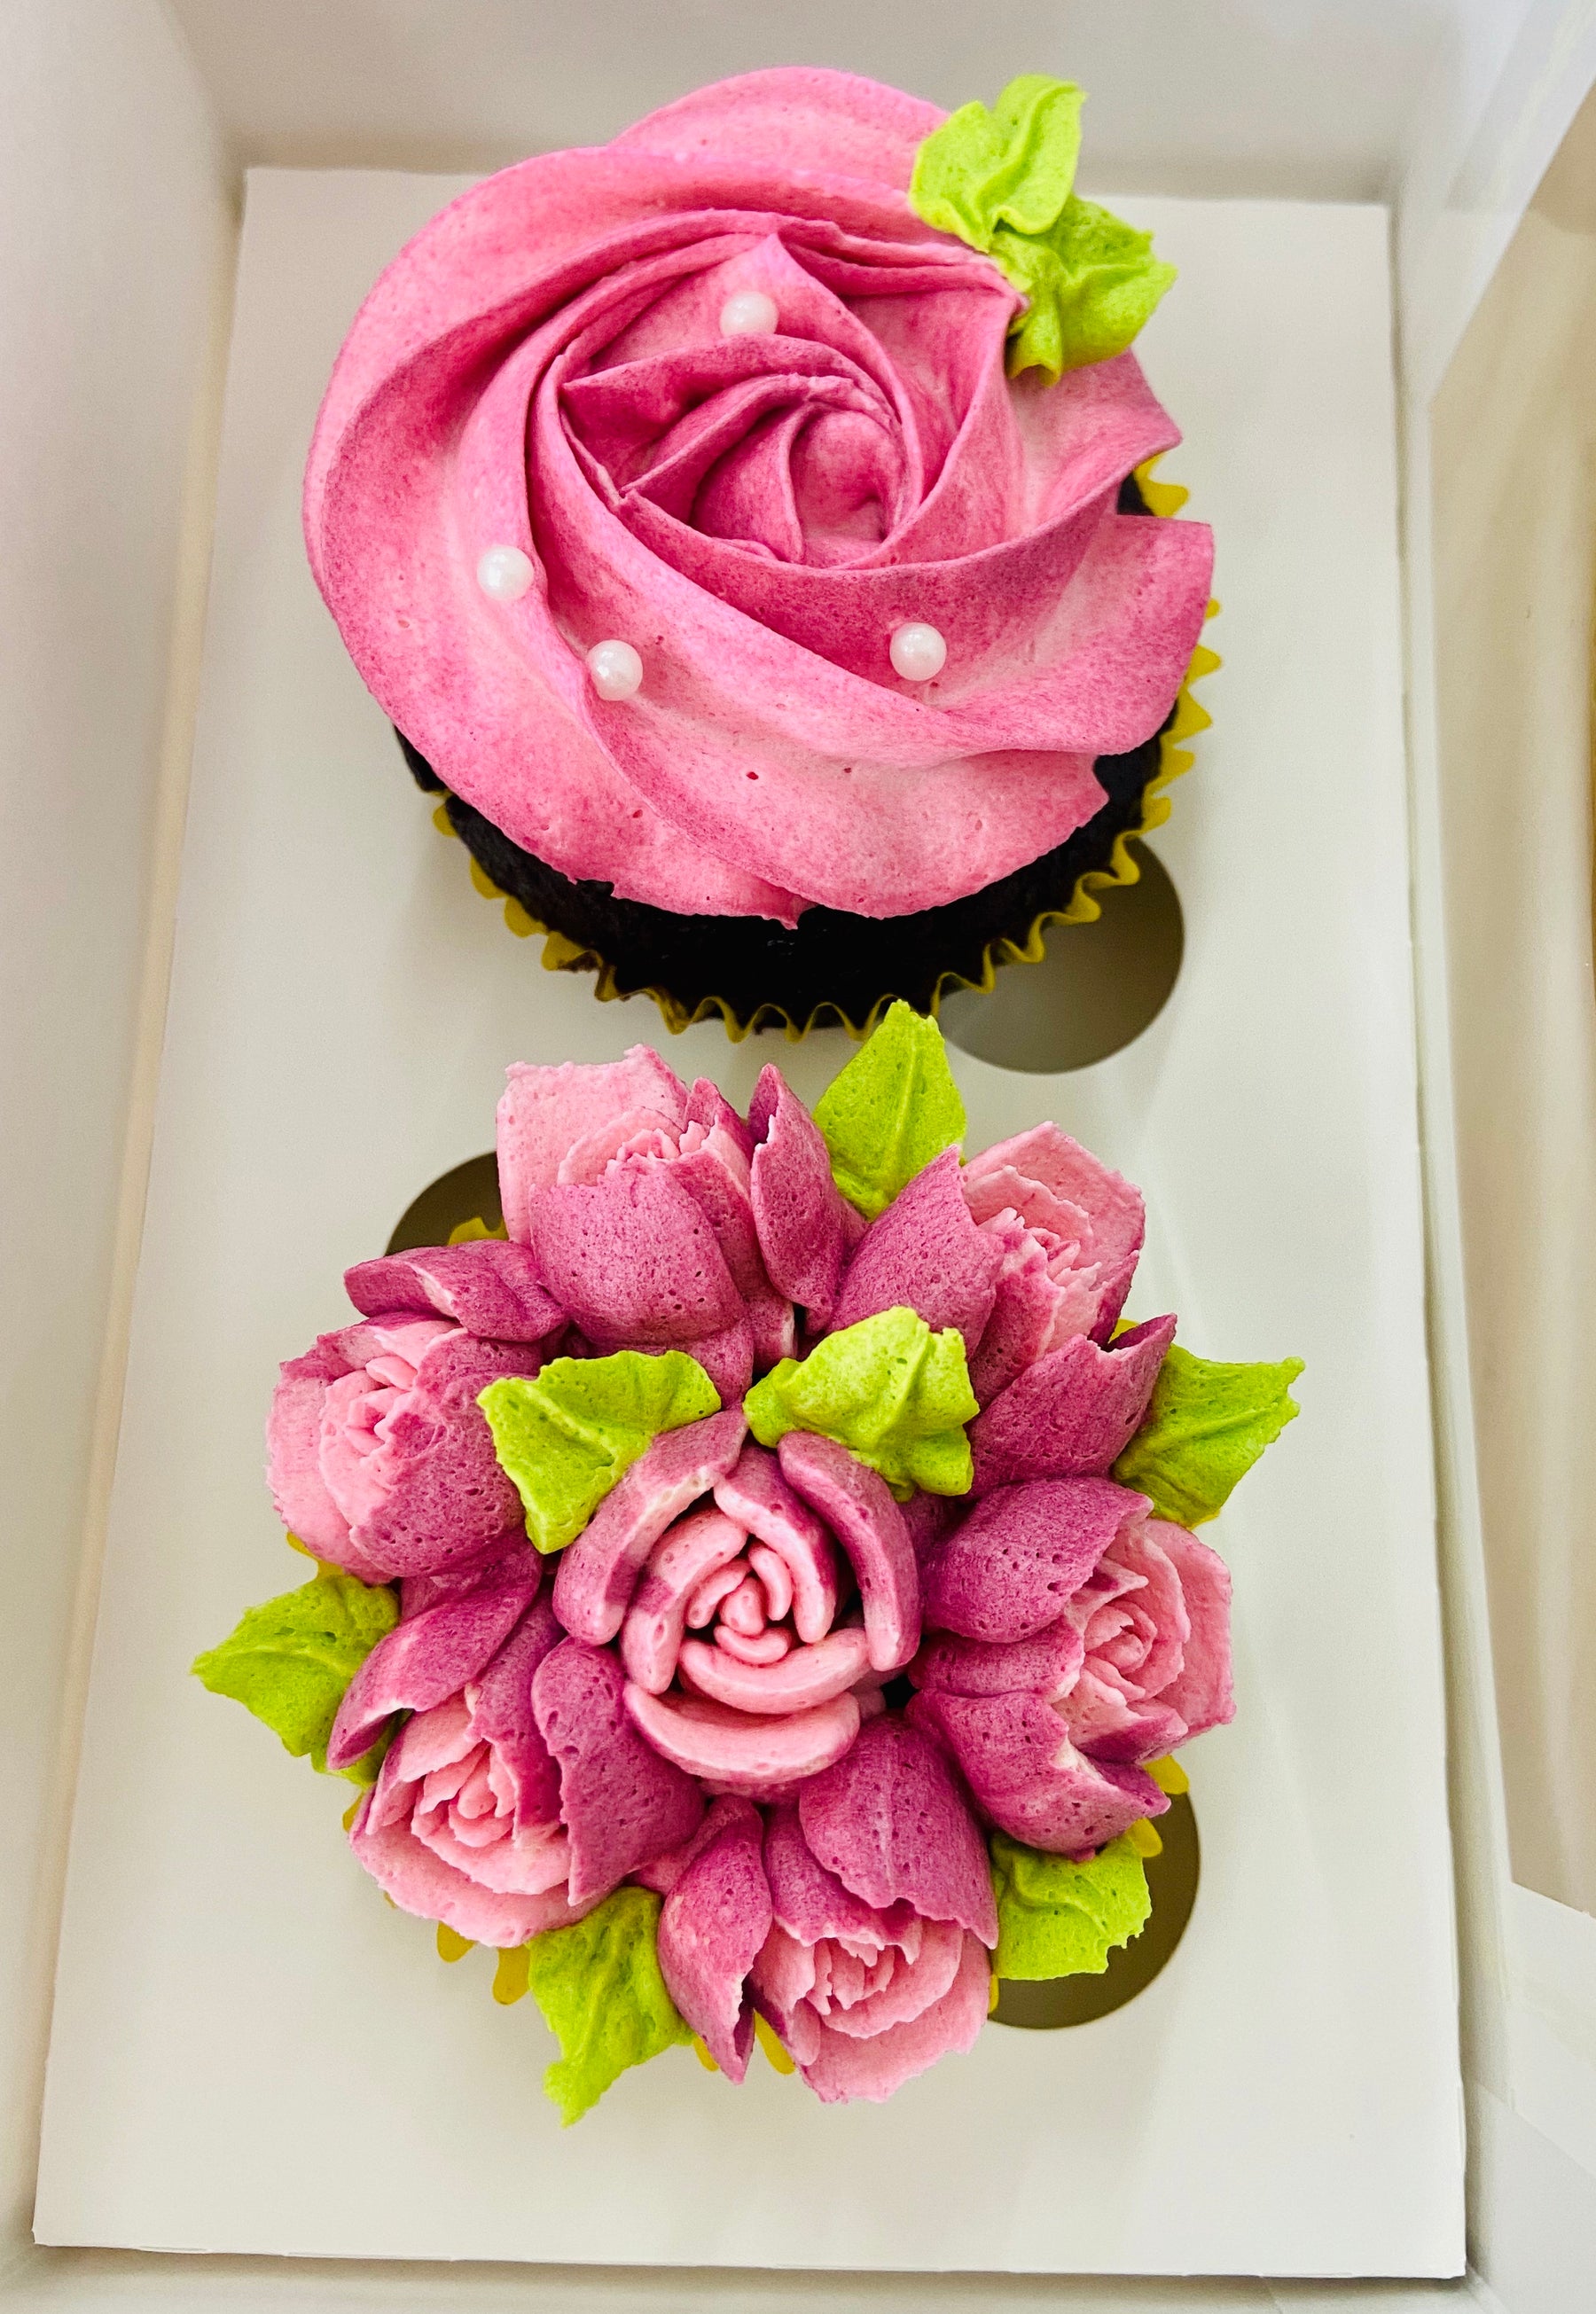 Millie Rose Cupcakes (Price list Only)